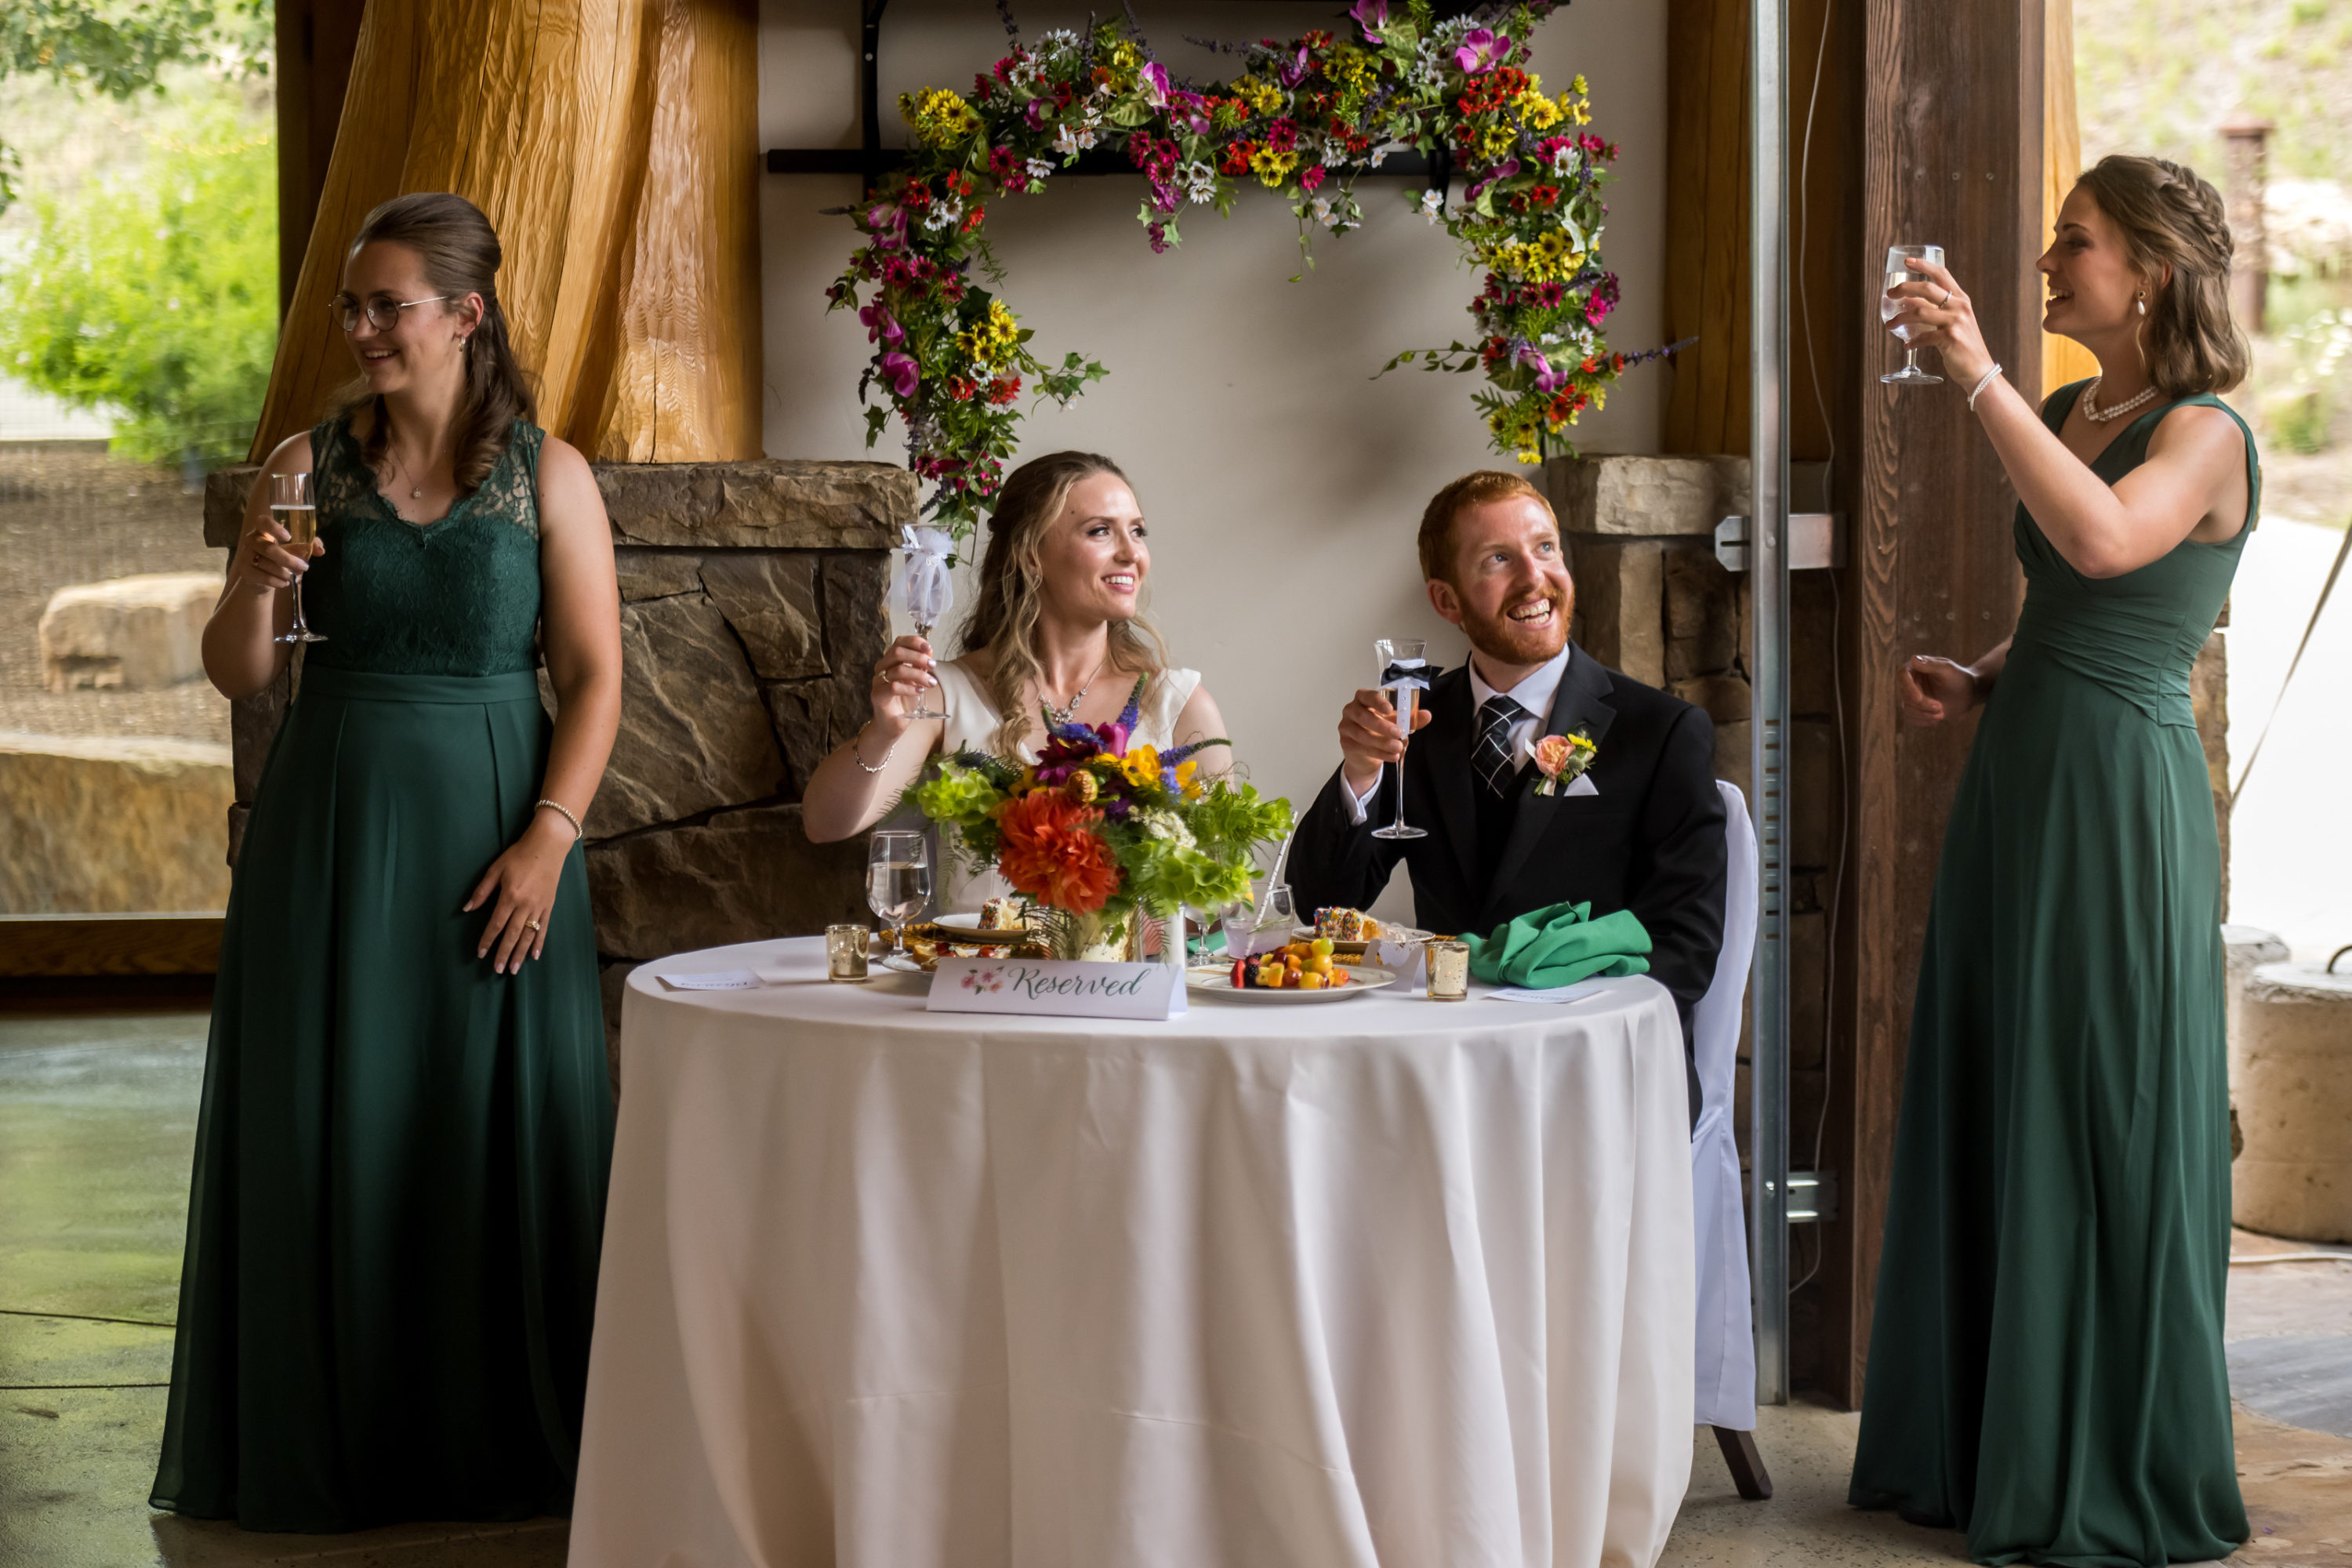 The co-maids of honor speak during a wedding in Telluride, Colorado.